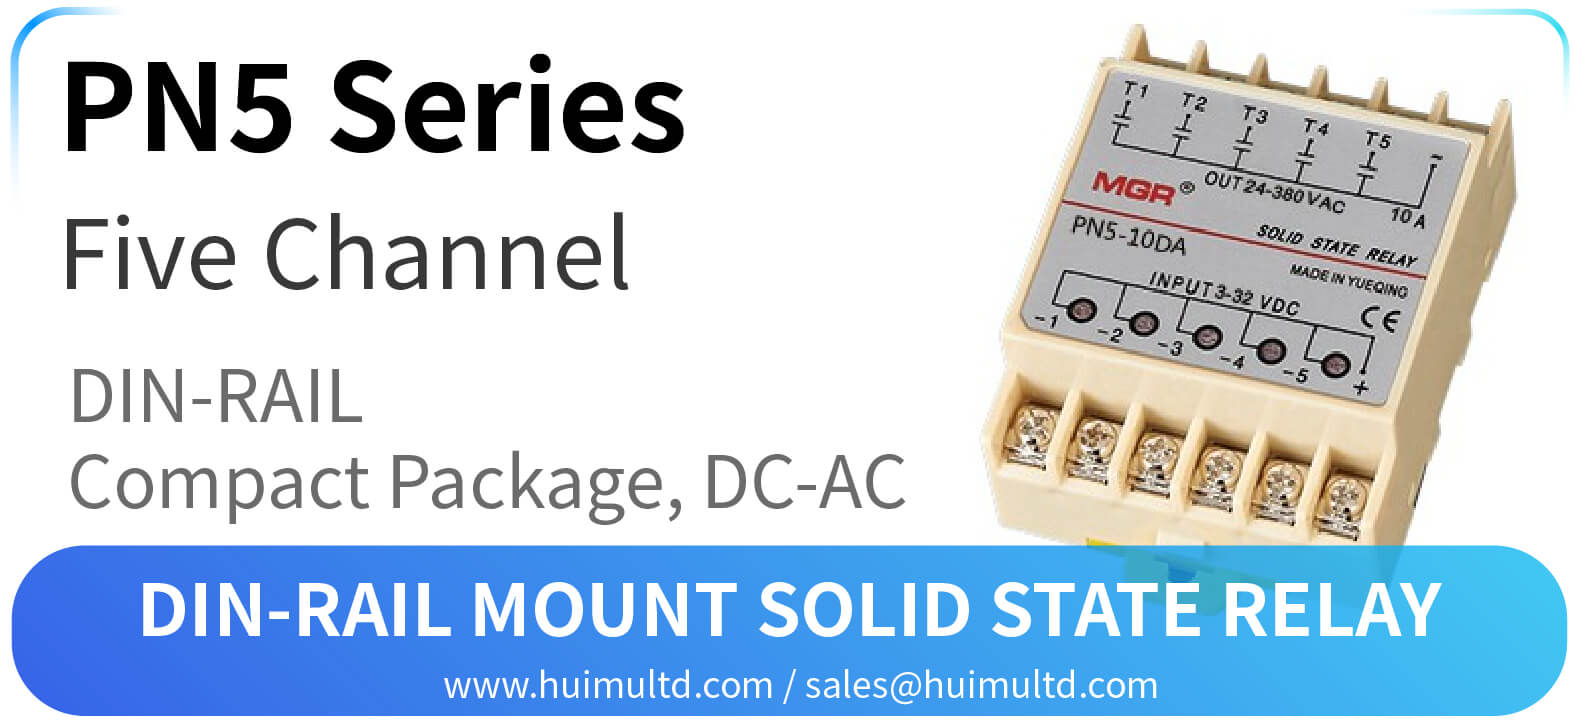 PN5 Series DIN-Rail Mount Solid State Relay